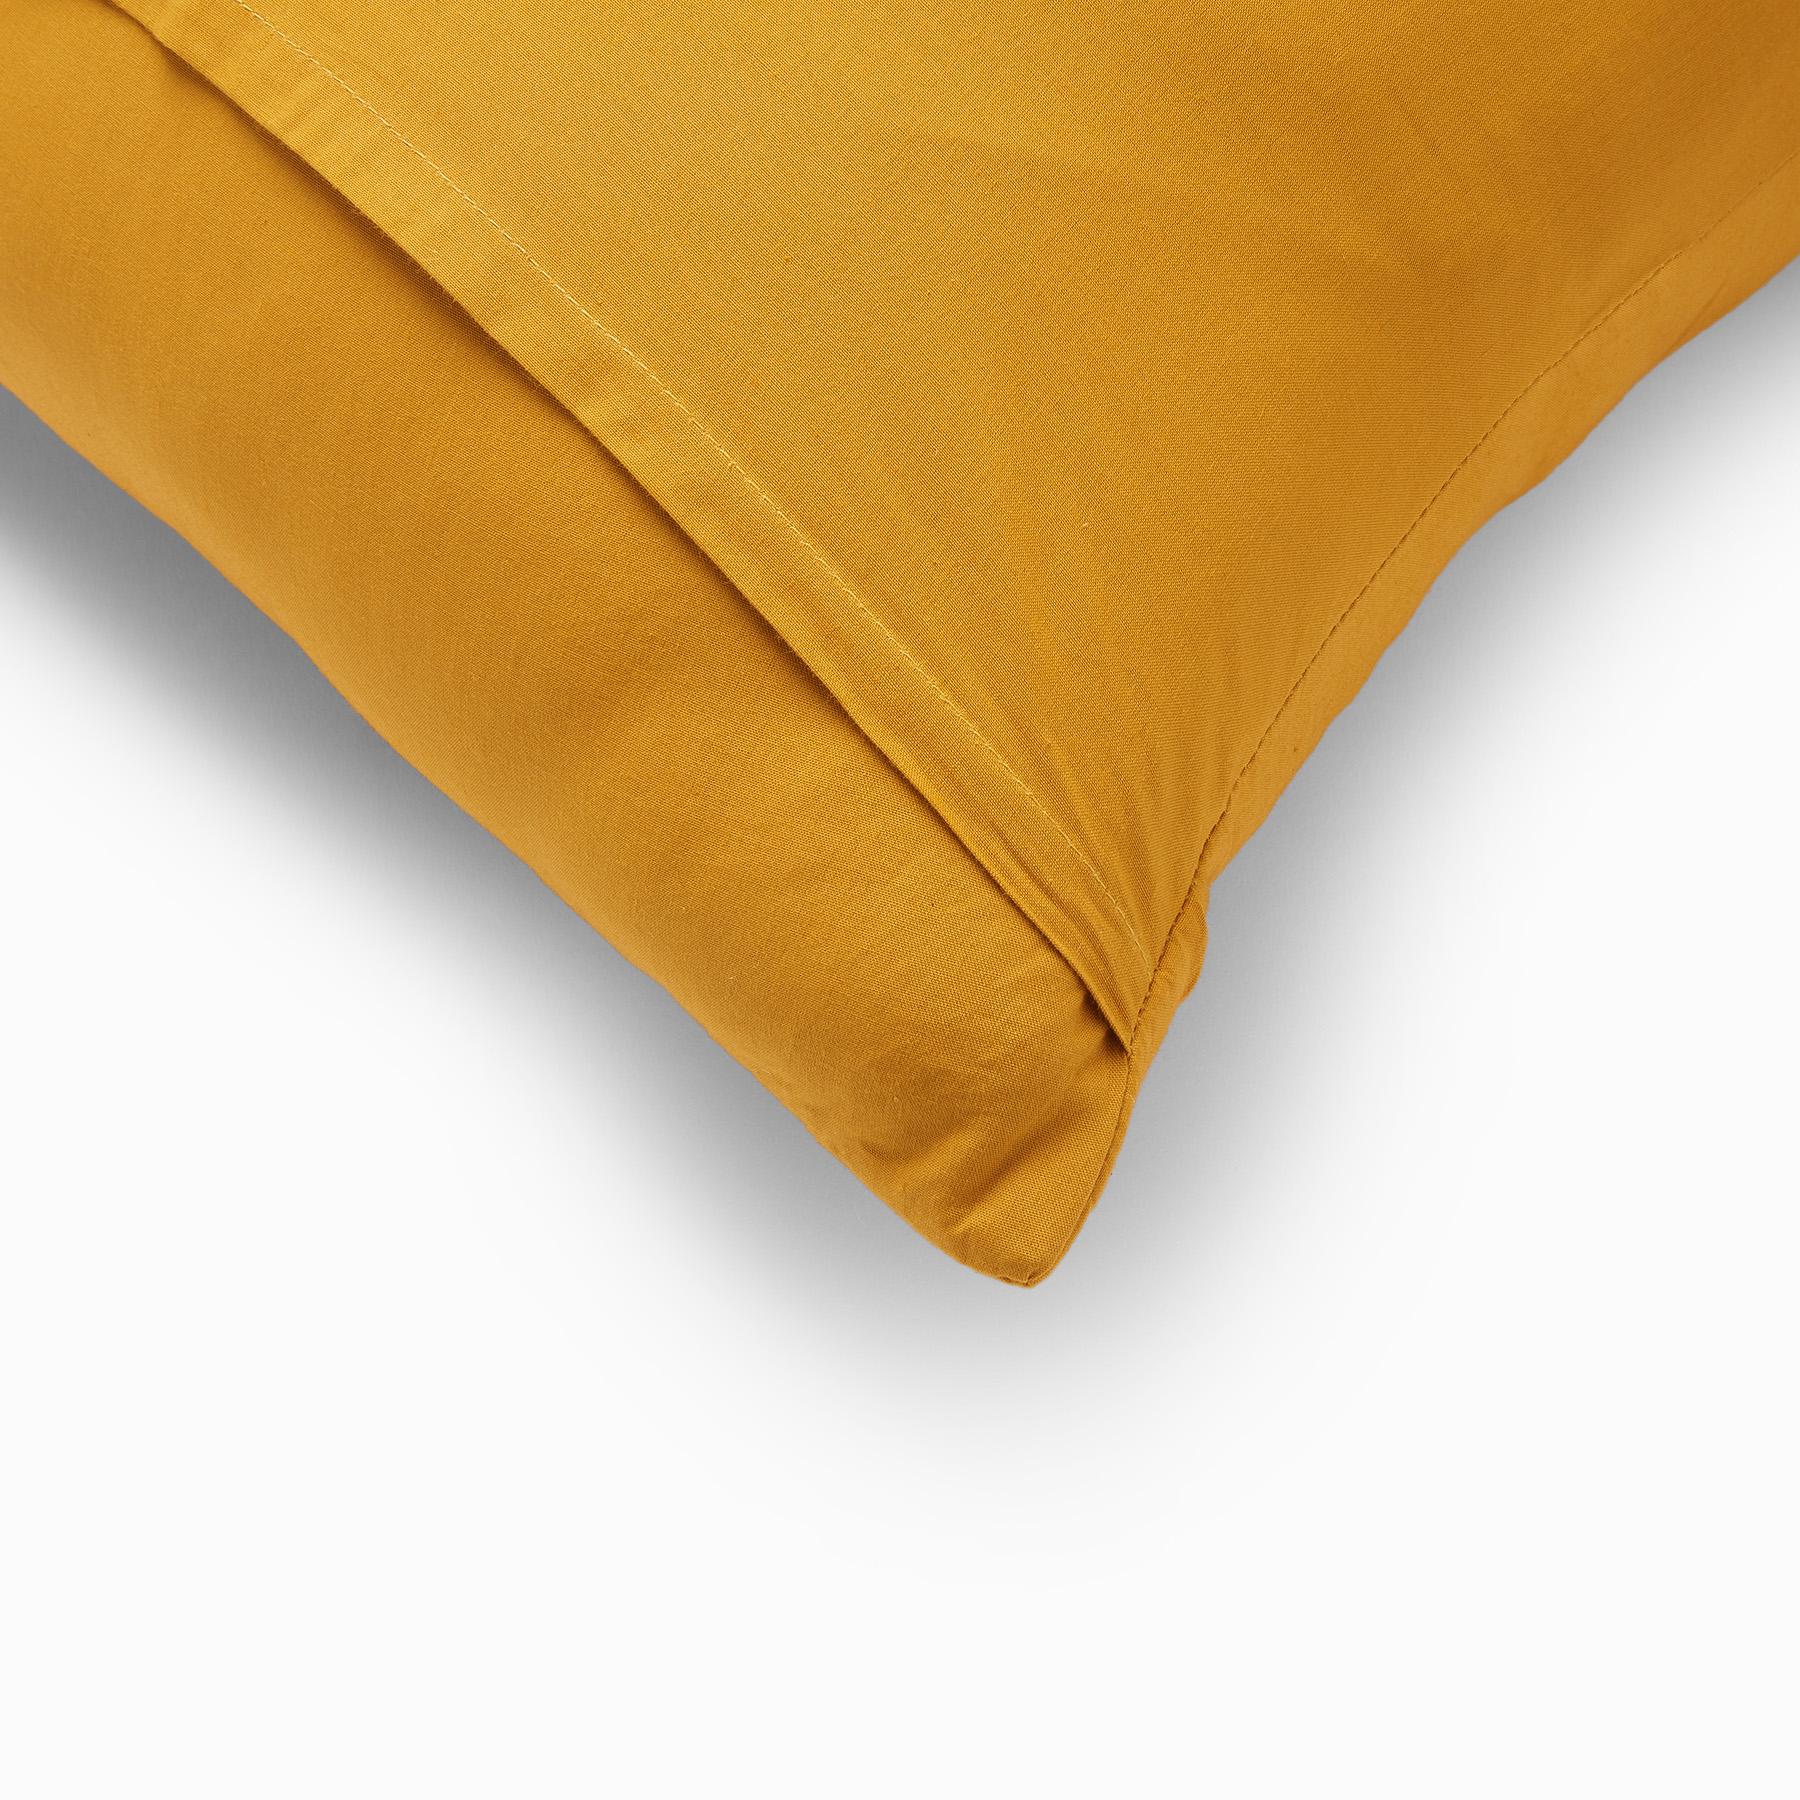 Mustard Embroidered Pillow Cases